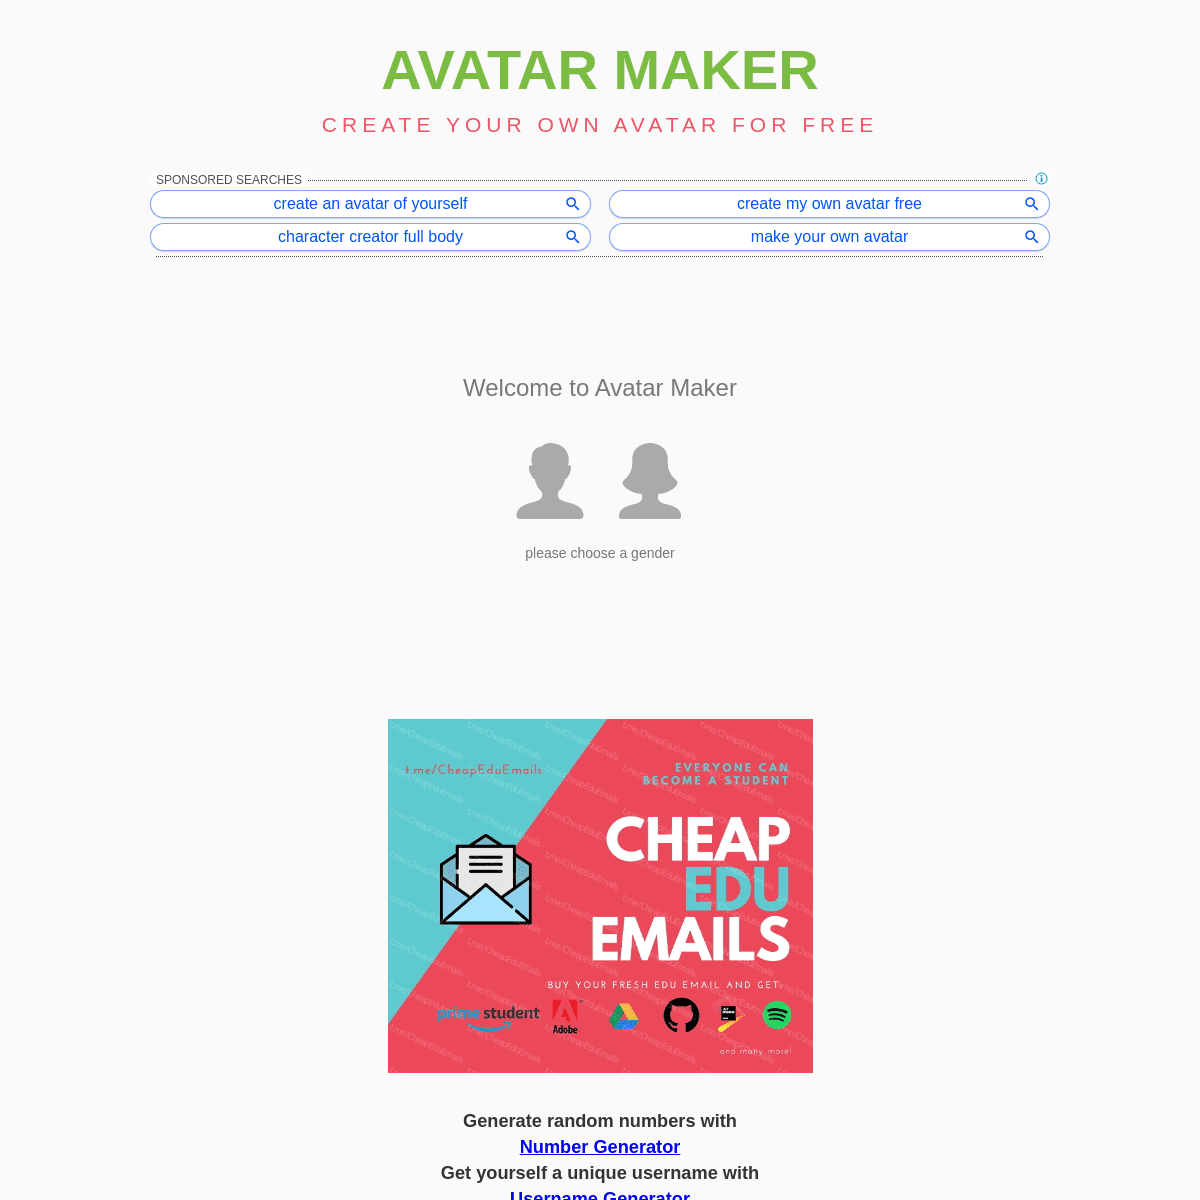 A complete backup of avatarmaker.com